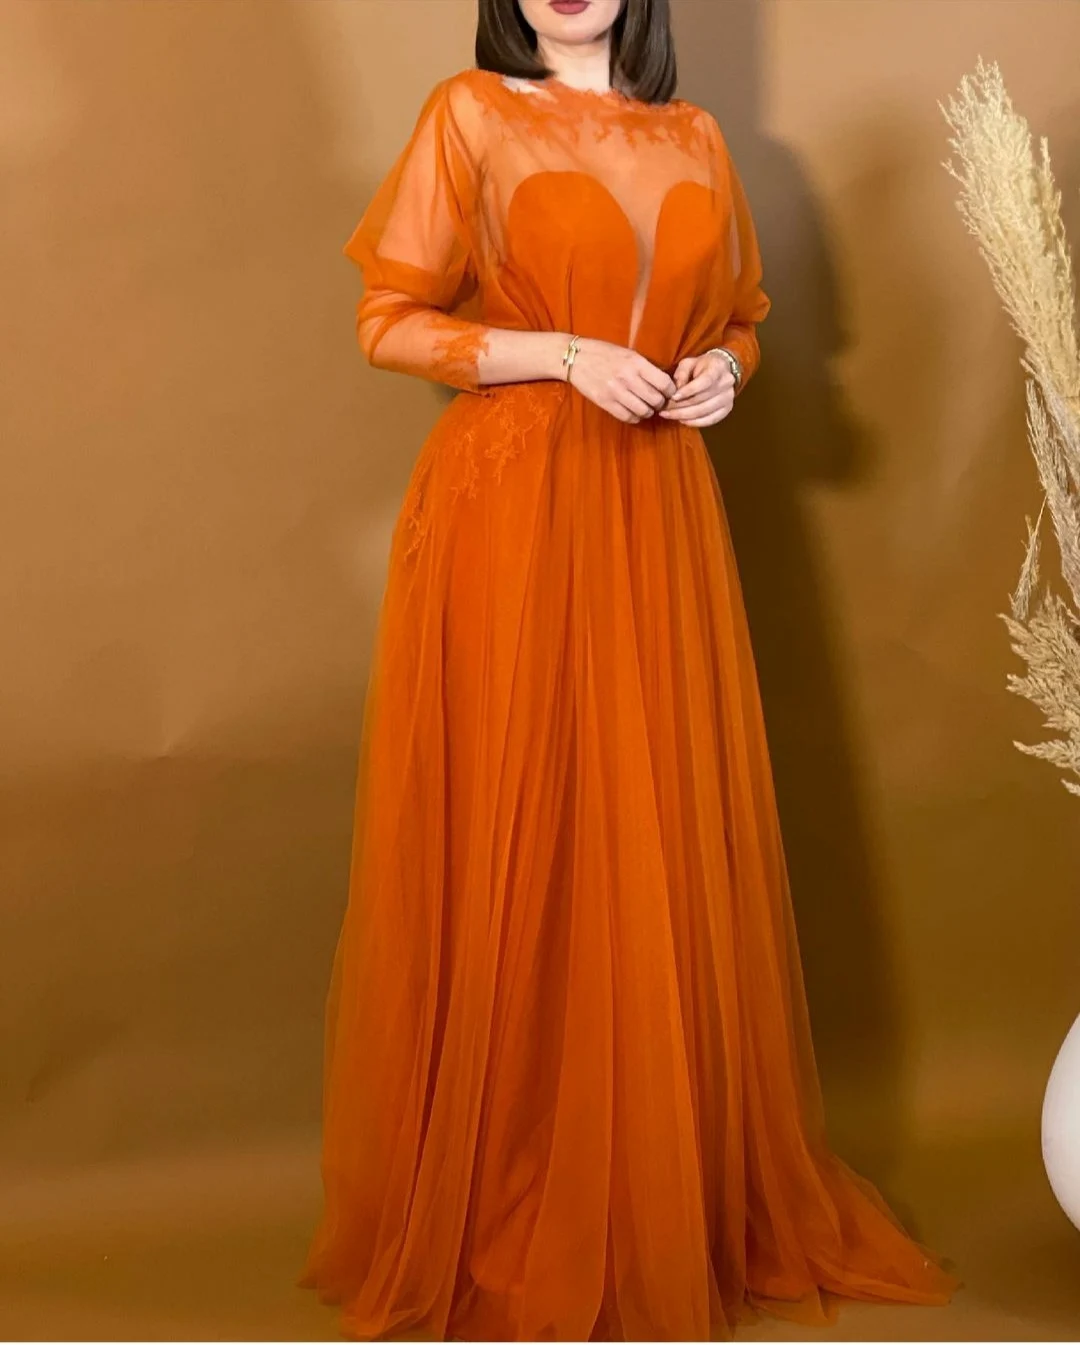 Elegant A-Line Tulle Orange Prom Dresses Long Sleeve Pleated O-Neck فساتين السهرة Party Evening Gown for women beautiful prom dresses